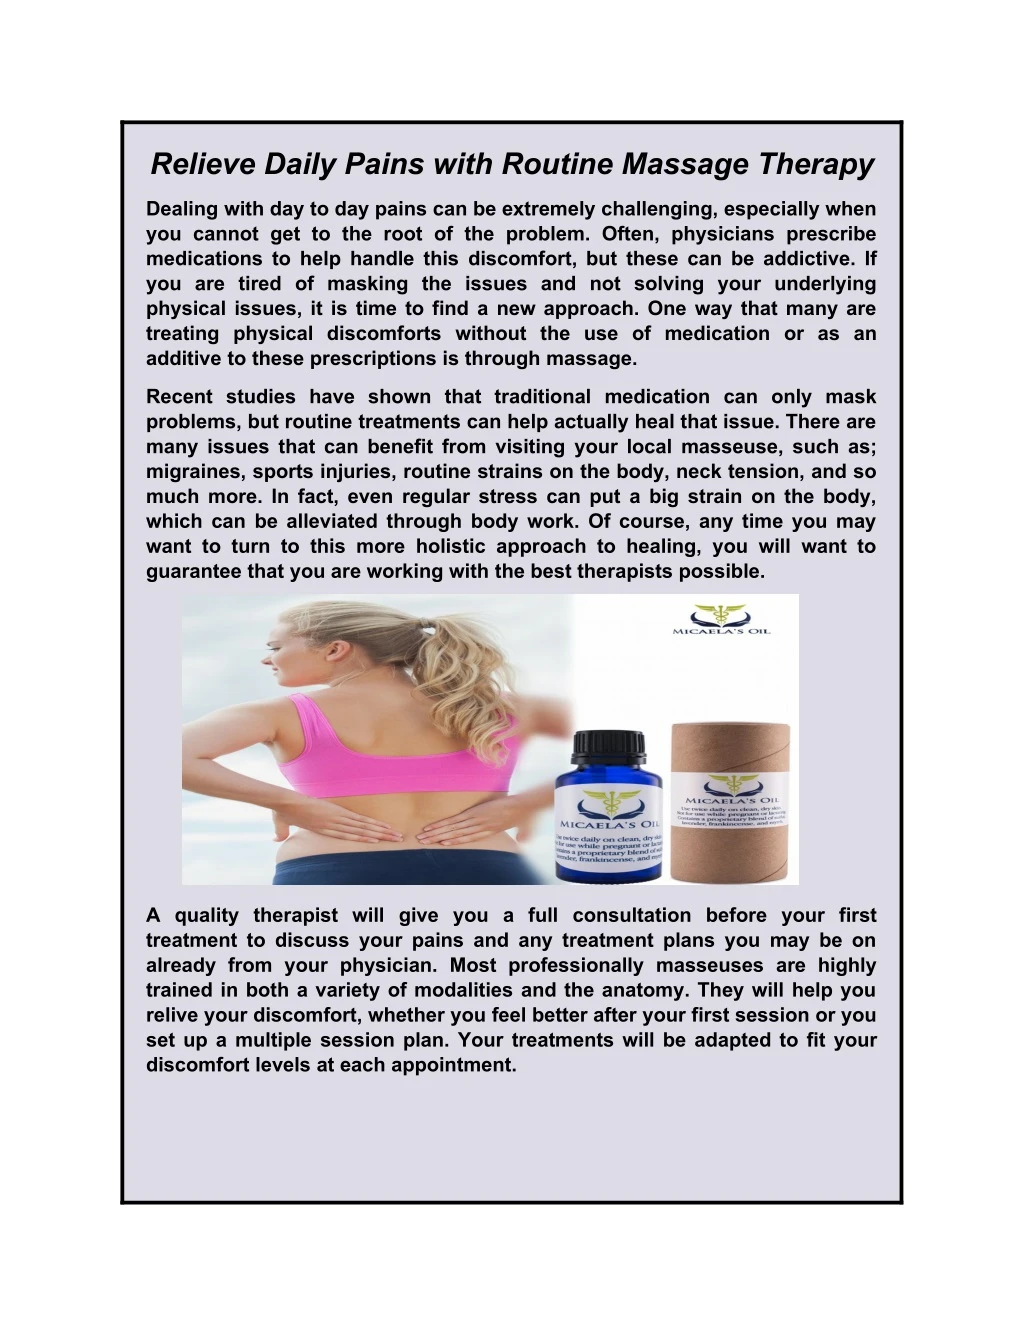 relieve daily pains with routine massage therapy